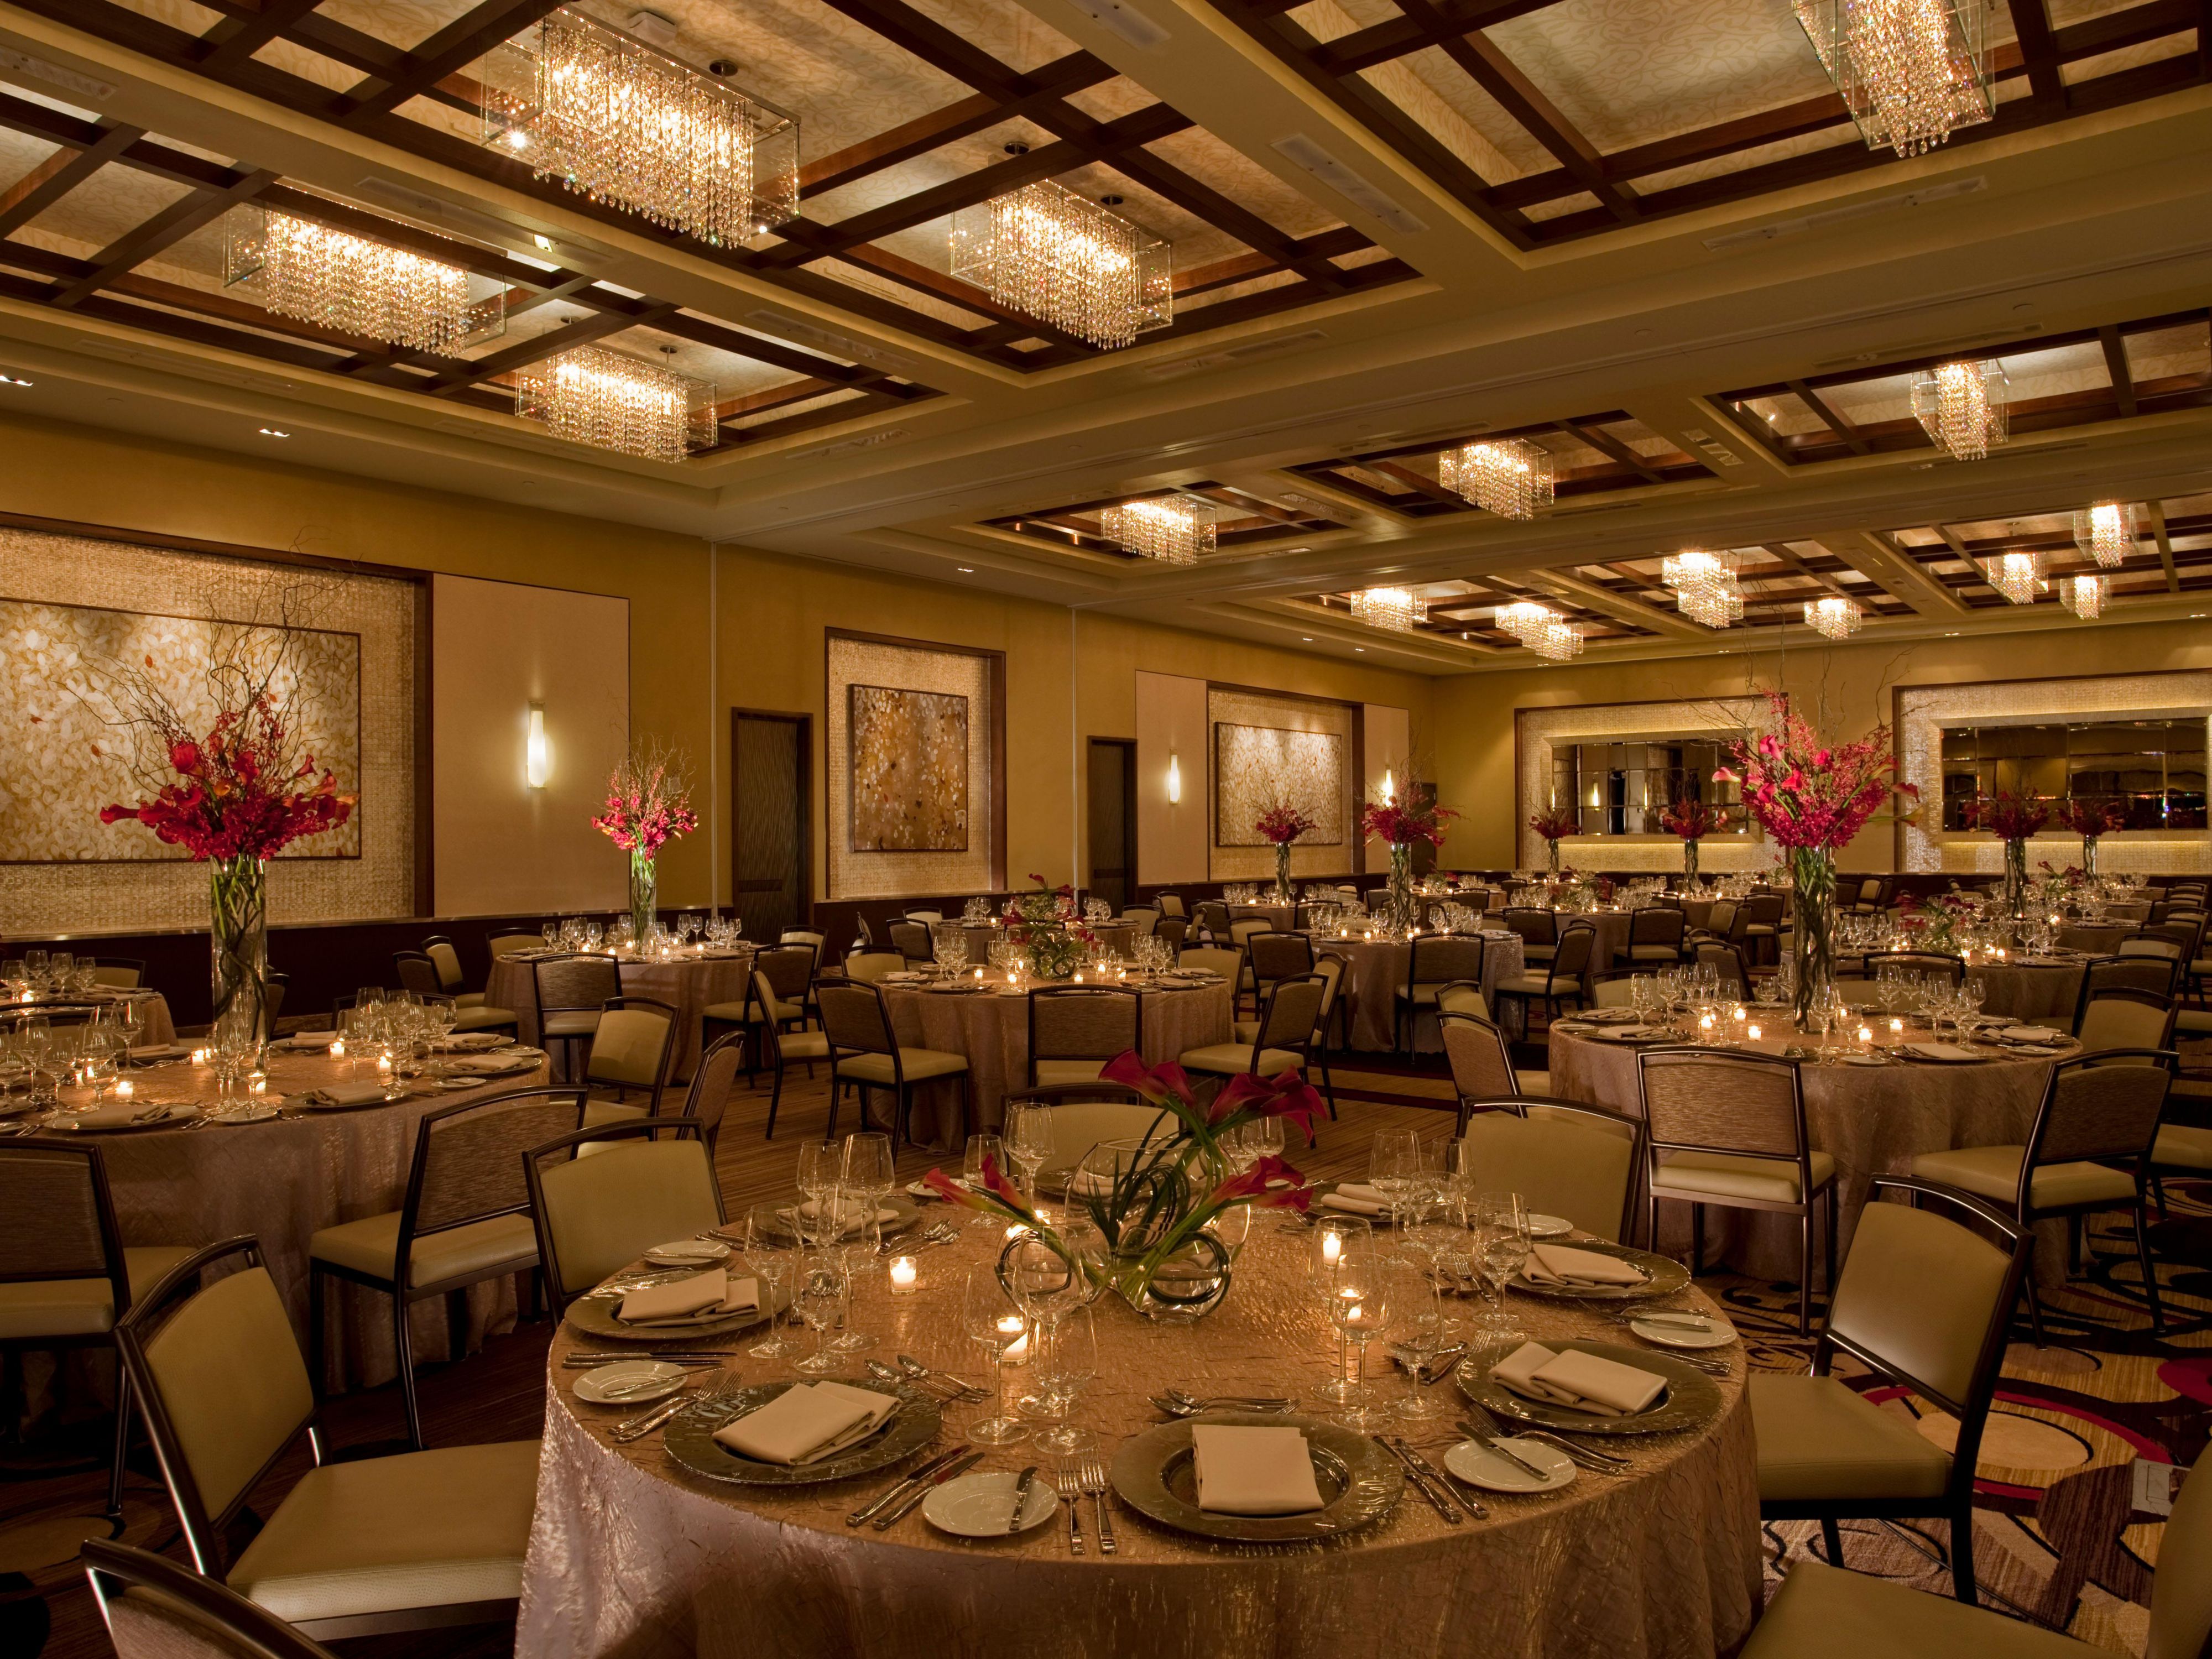 Gotham Ballroom is perfect for a special event